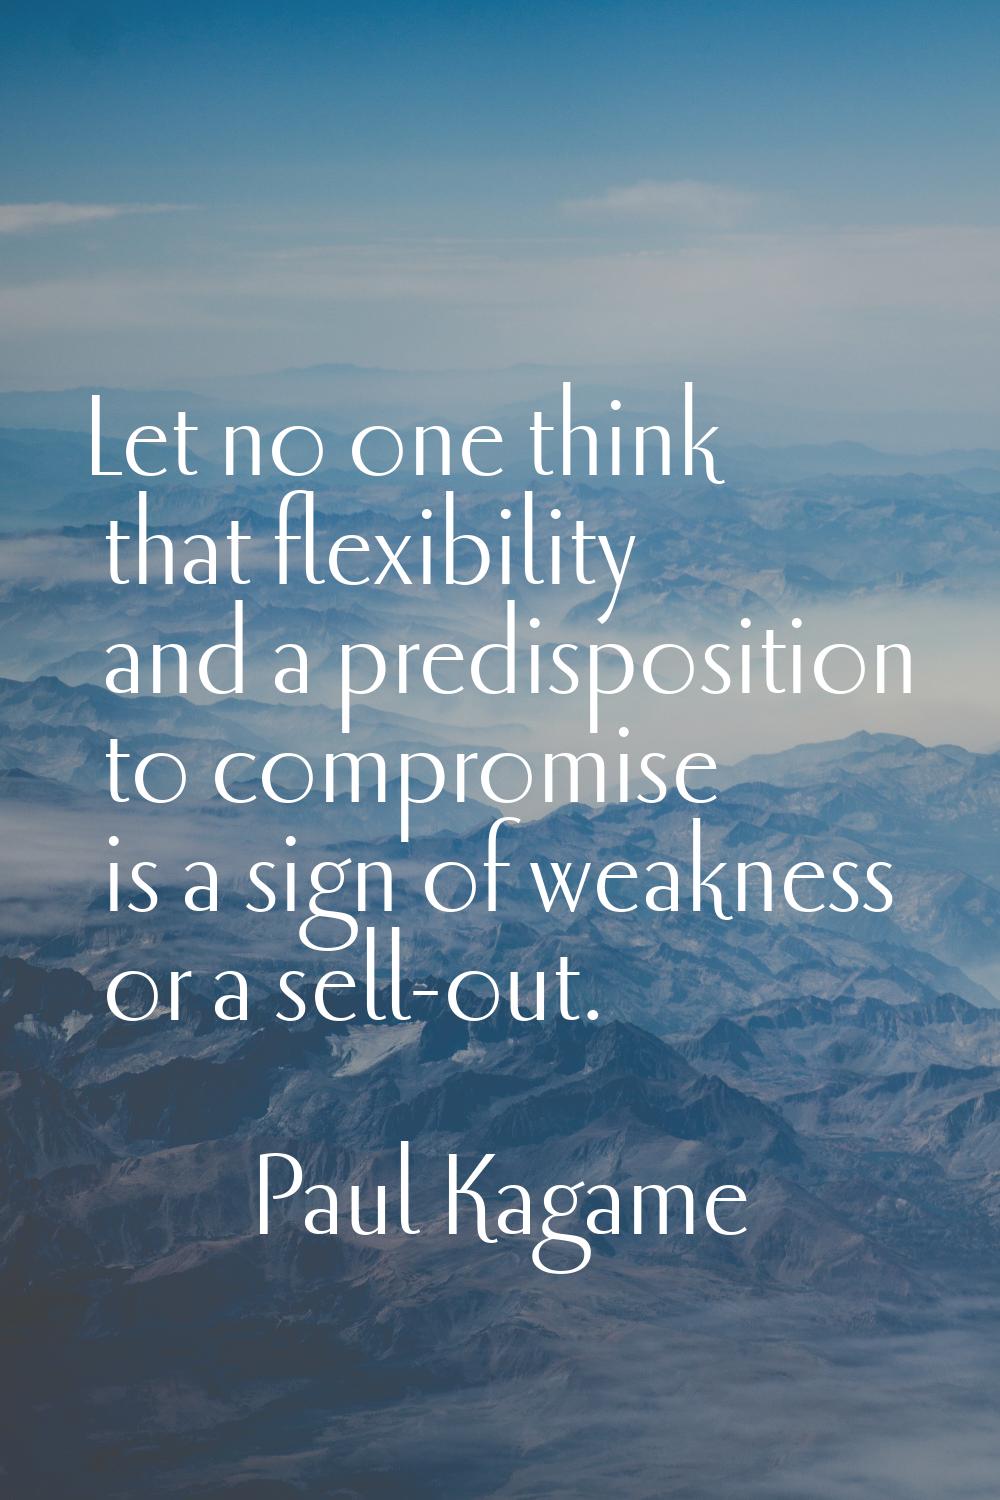 Let no one think that flexibility and a predisposition to compromise is a sign of weakness or a sel